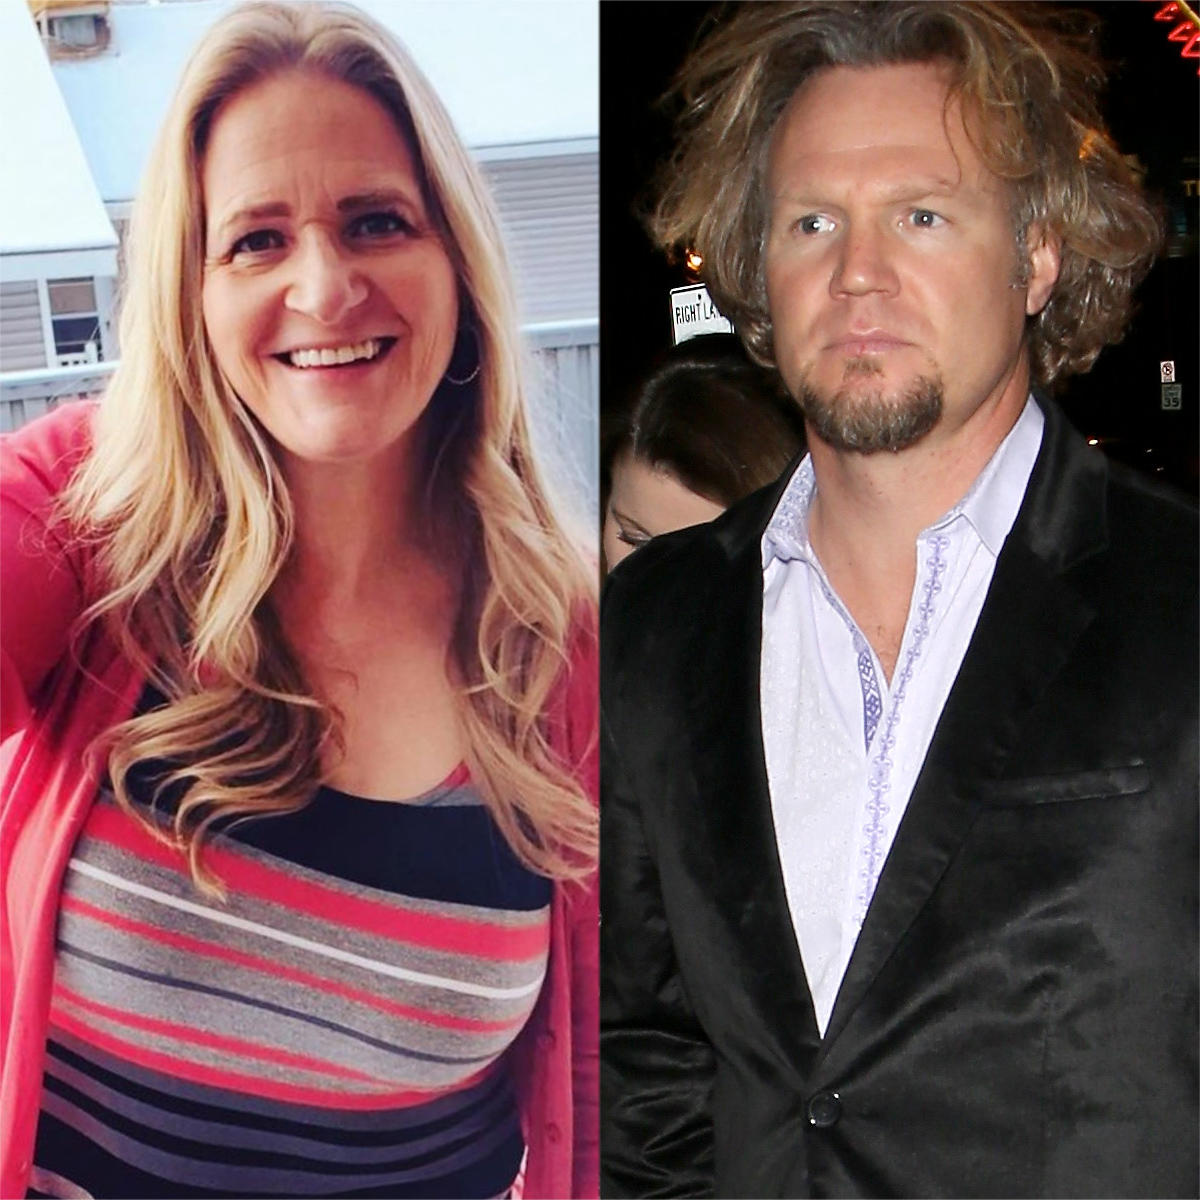 Sister Wives’ Christine Brown Reveals She’s in an Exclusive Relationship After Kody Brown Breakup – E! Online